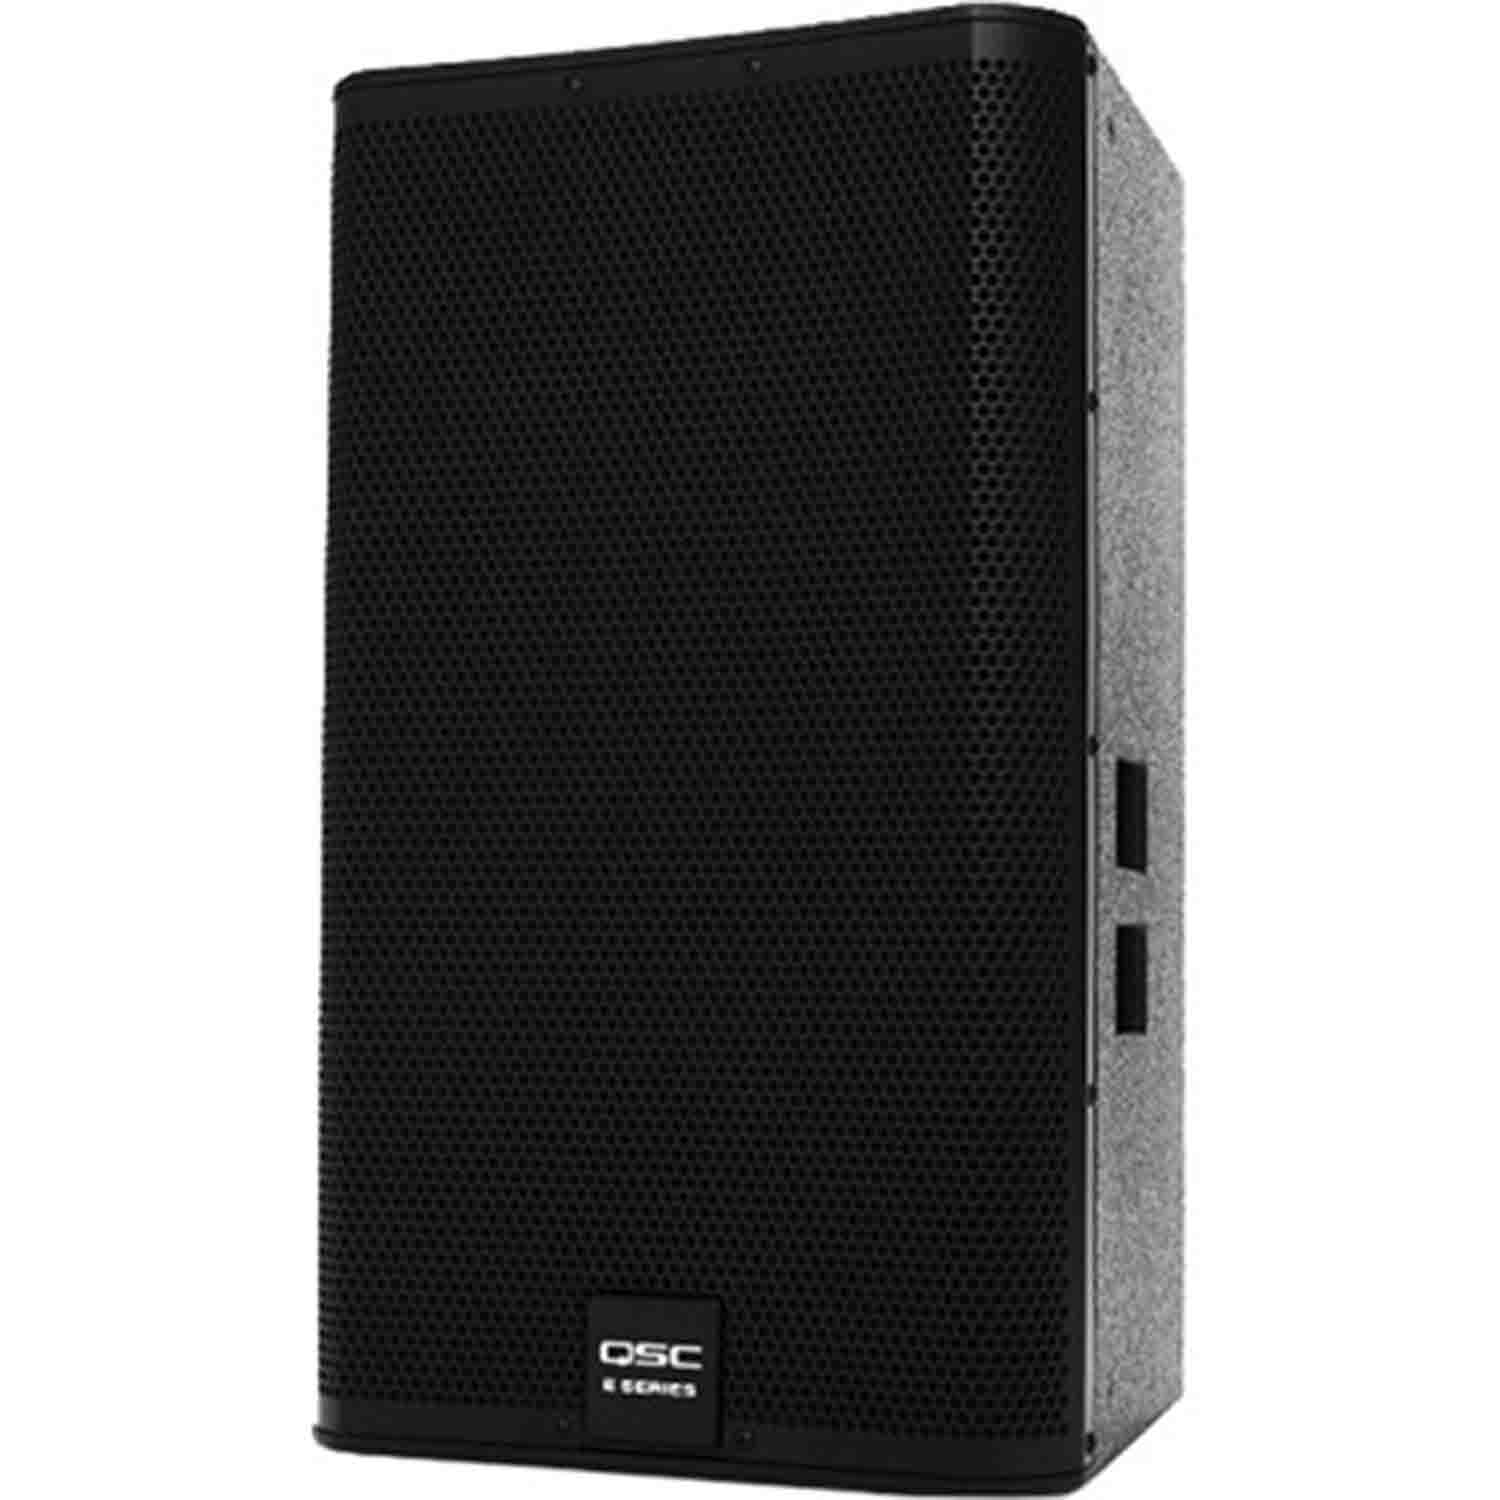 QSC E115, 15 Inches 2-Way Externally Powered, Live Sound Reinforcement Loud Speaker - Black - Hollywood DJ